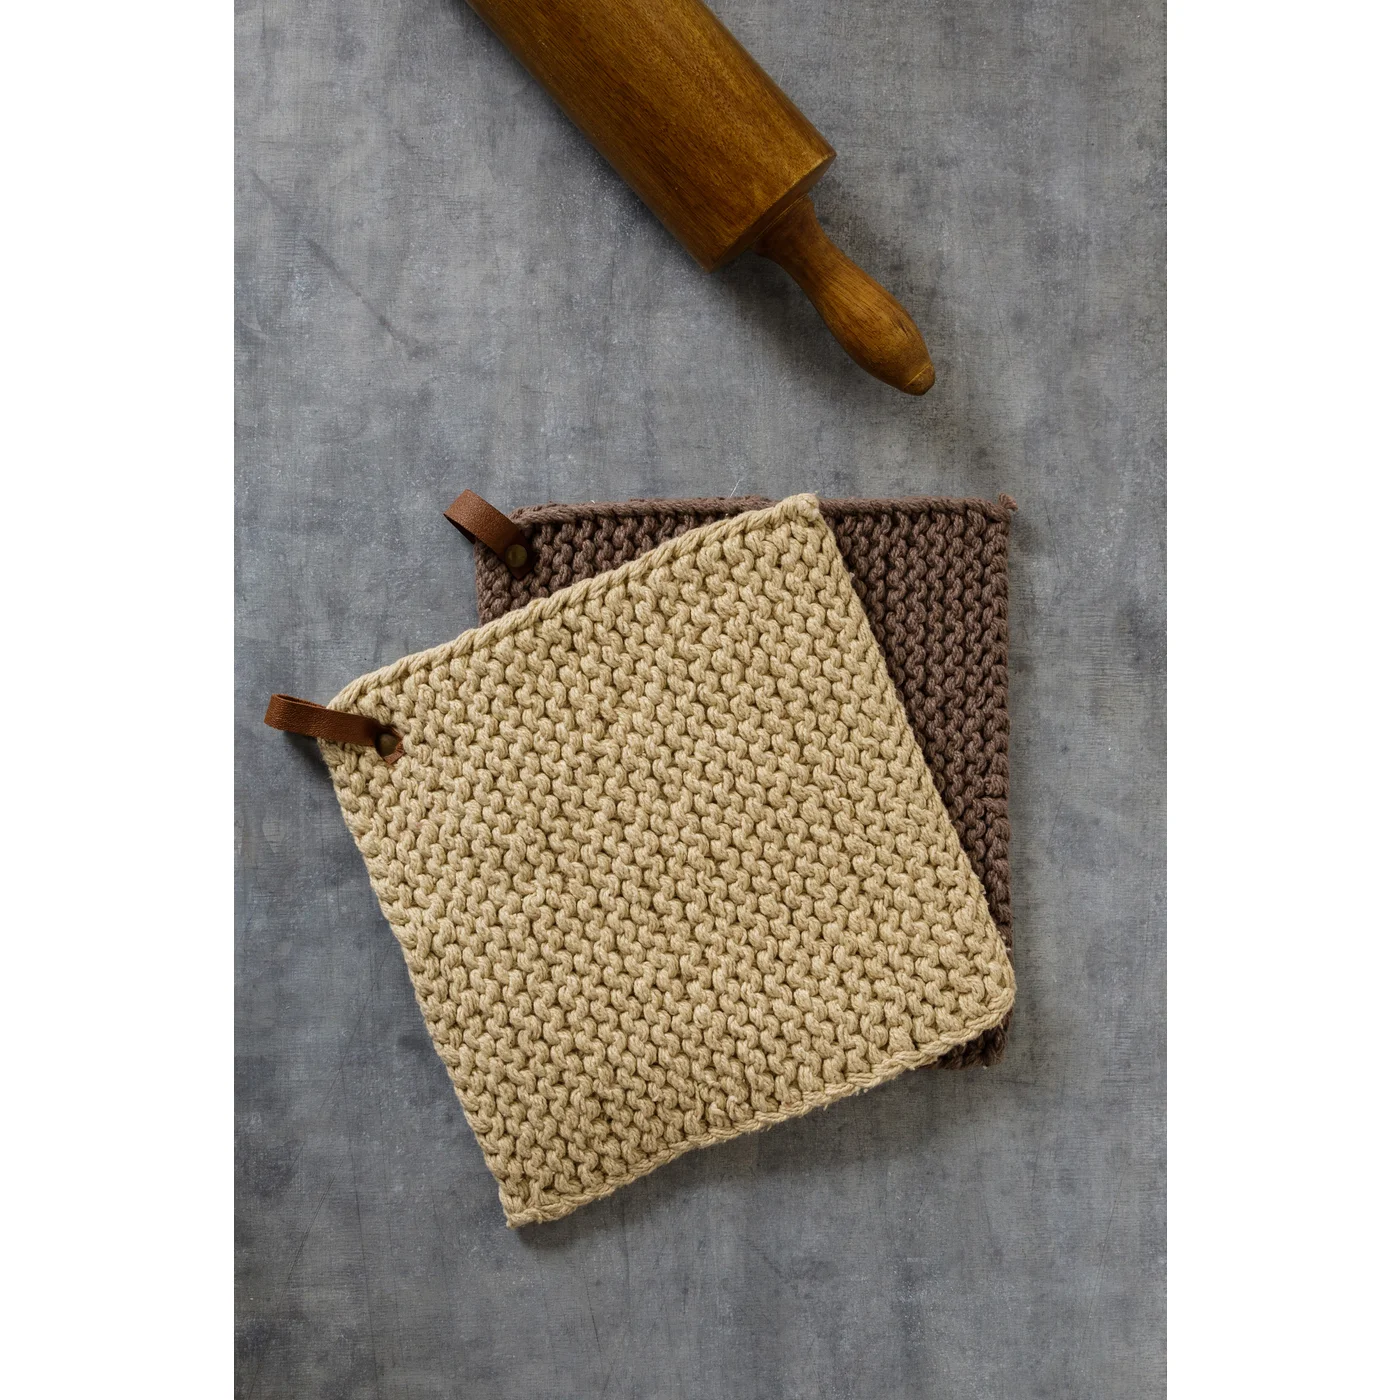 Set of 2 Gray and Tan Knitted Pot Holders